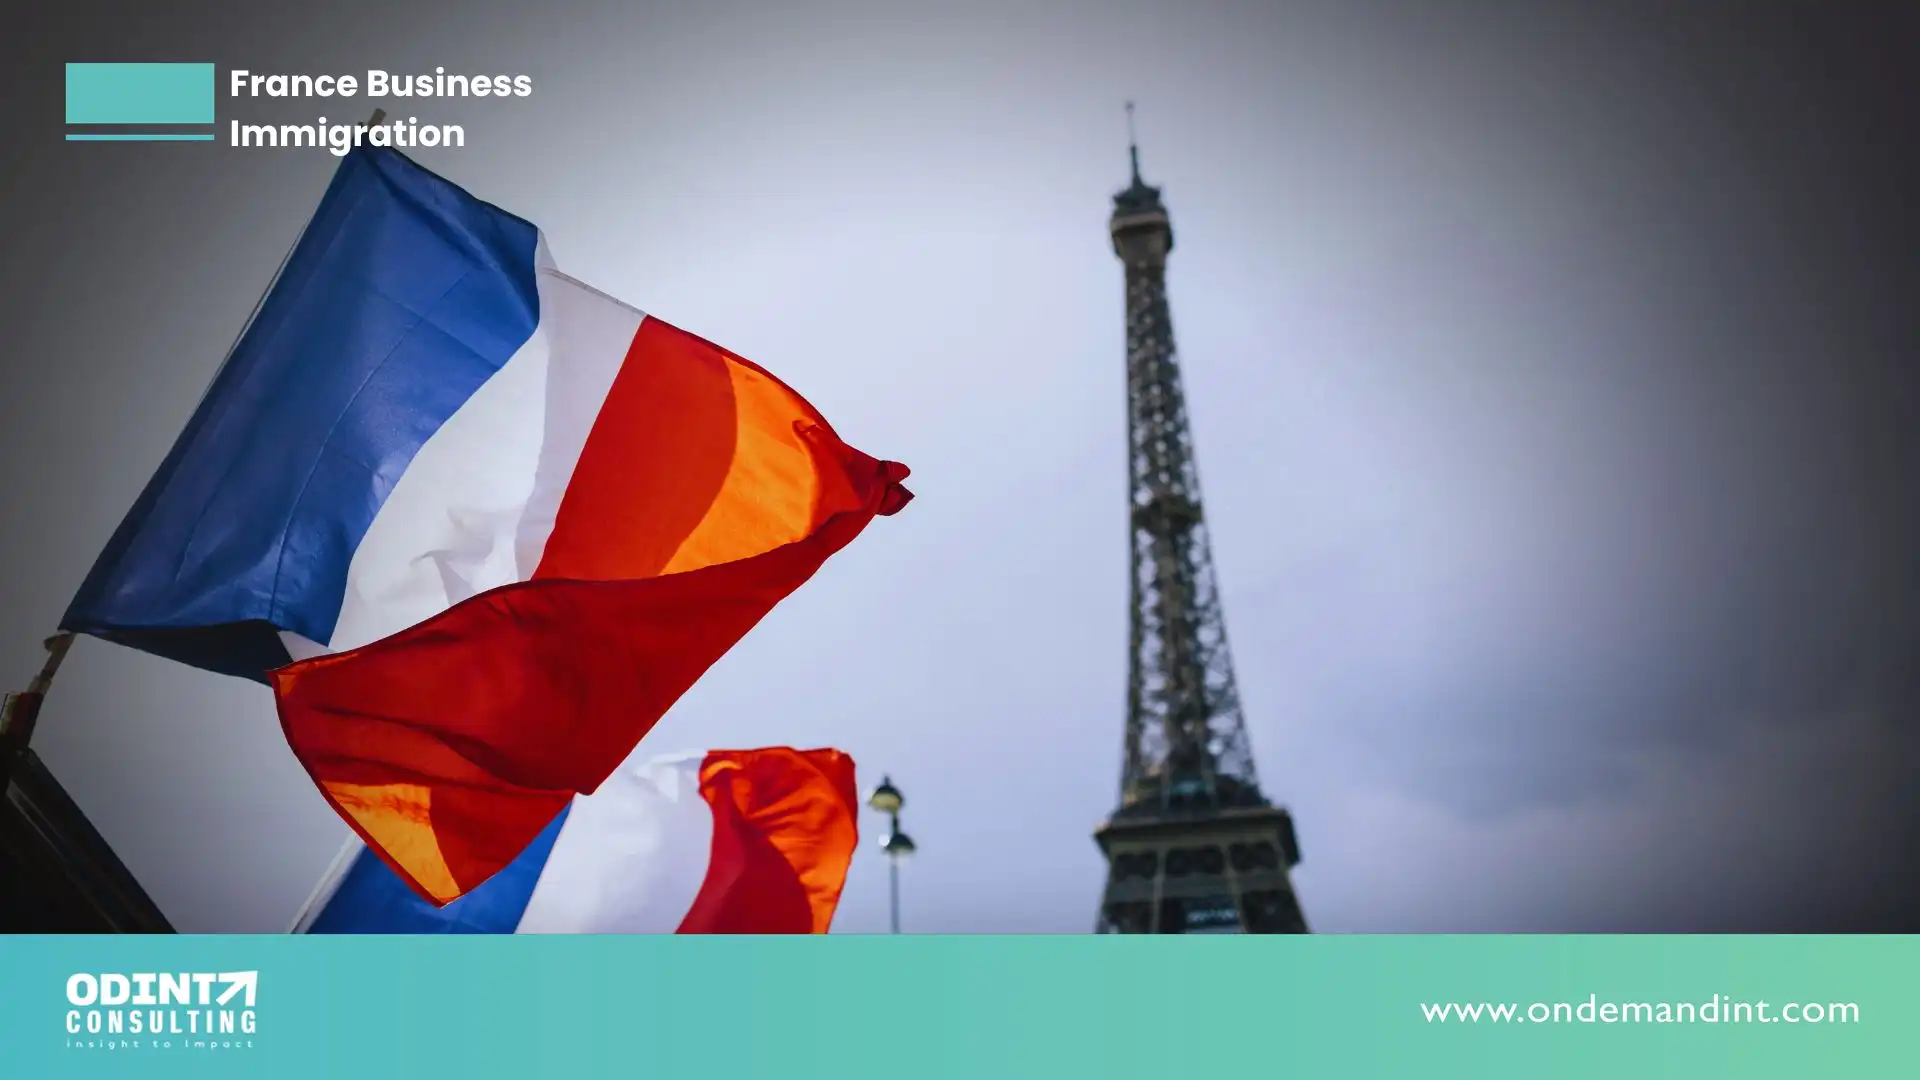 France Business Immigration